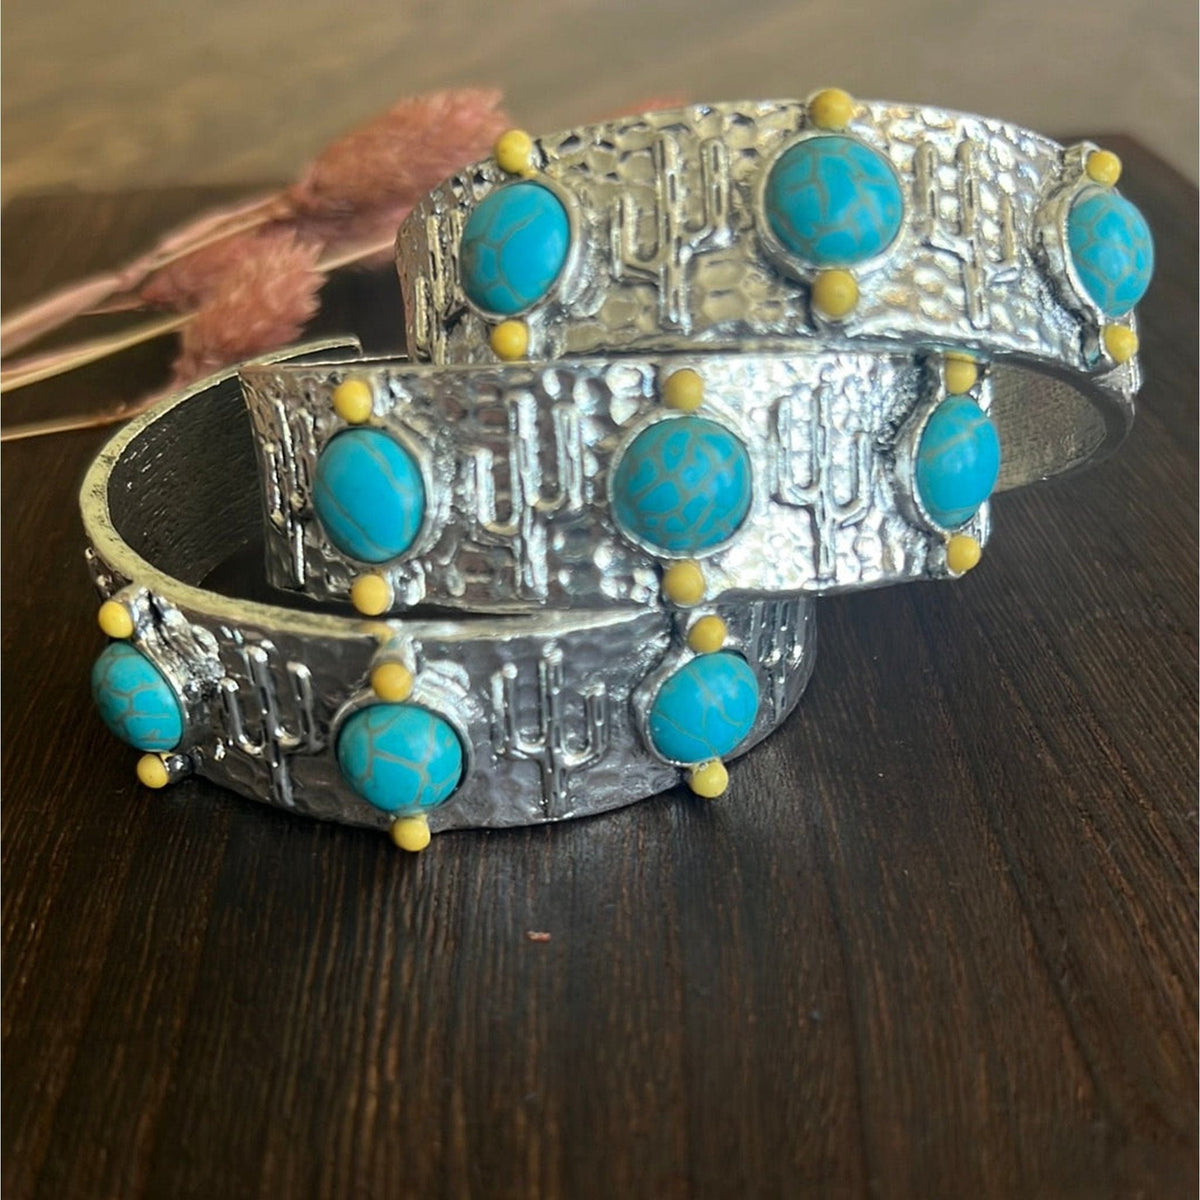 The Desert Sun Bracelet with Turquoise Accents Western Bracelet TheFringeCultureCollective